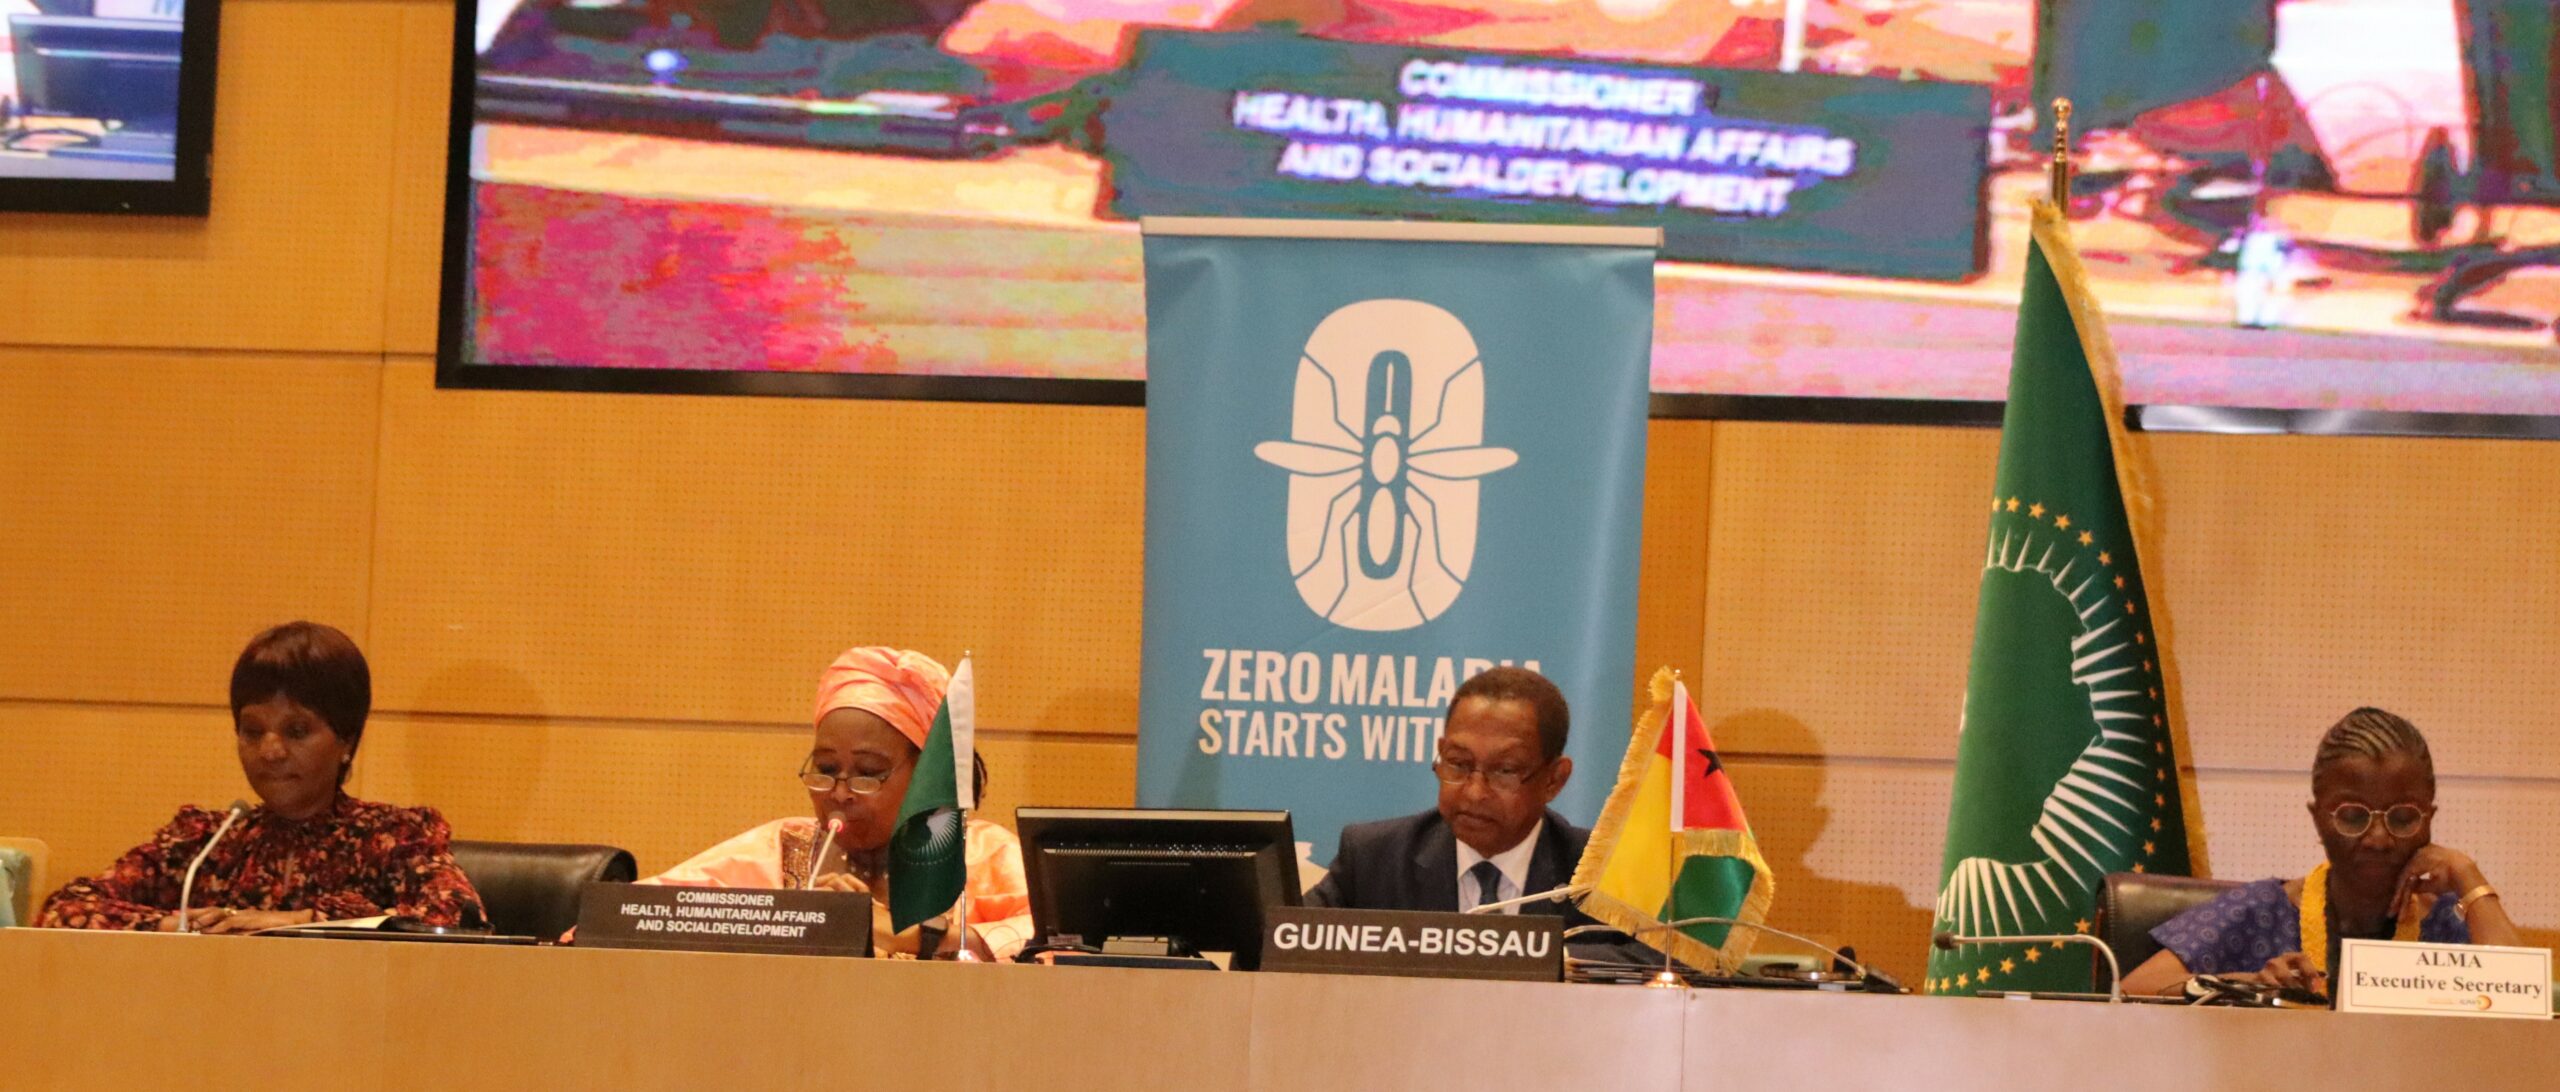 Towards a malaria-free future: strong advocacy and concerted action at the 37th African Union summit ~ Ijambo Santé